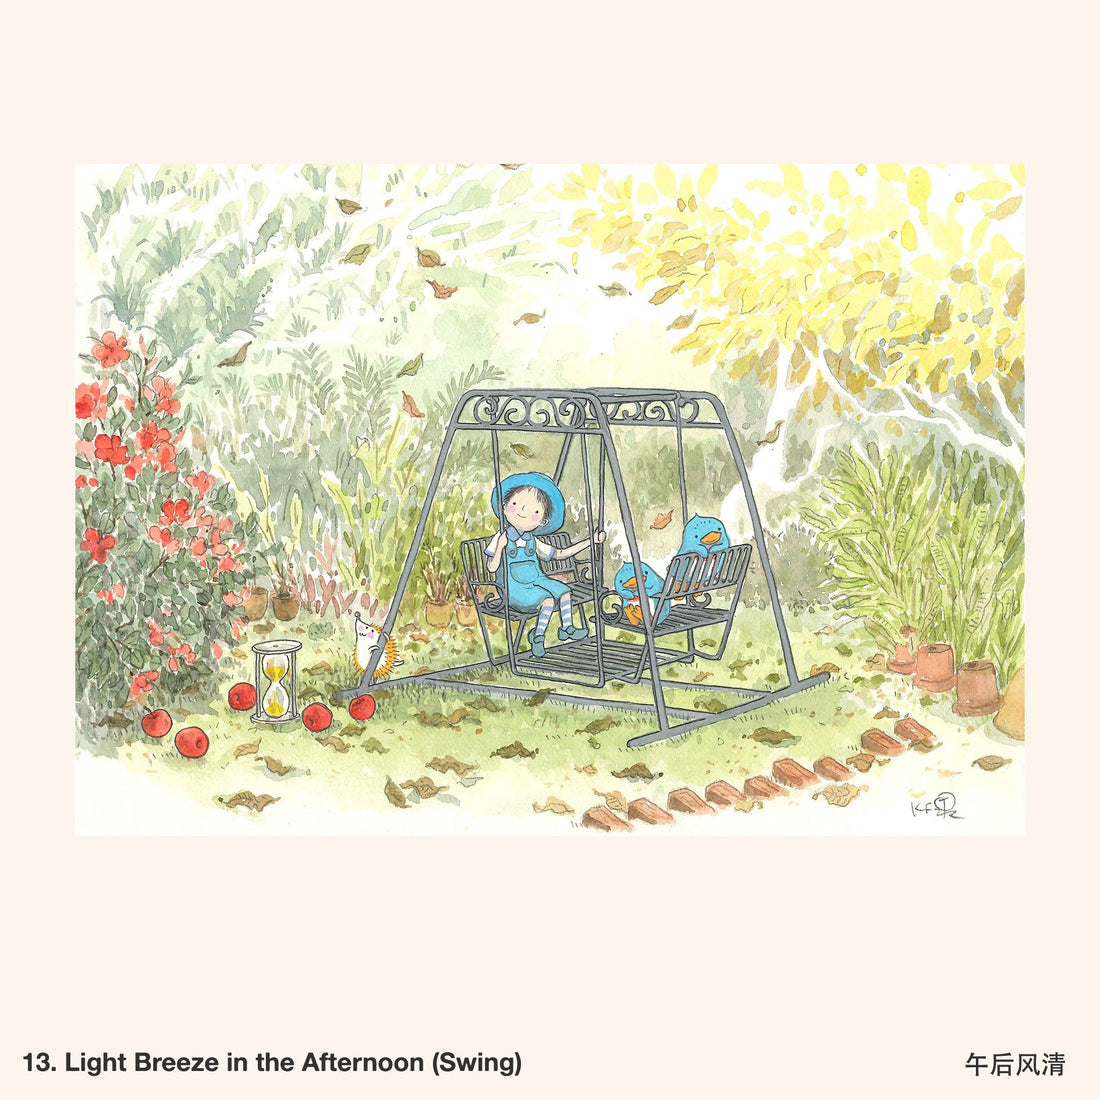 13. Light Breeze in the Afternoon (Swing) Artwork